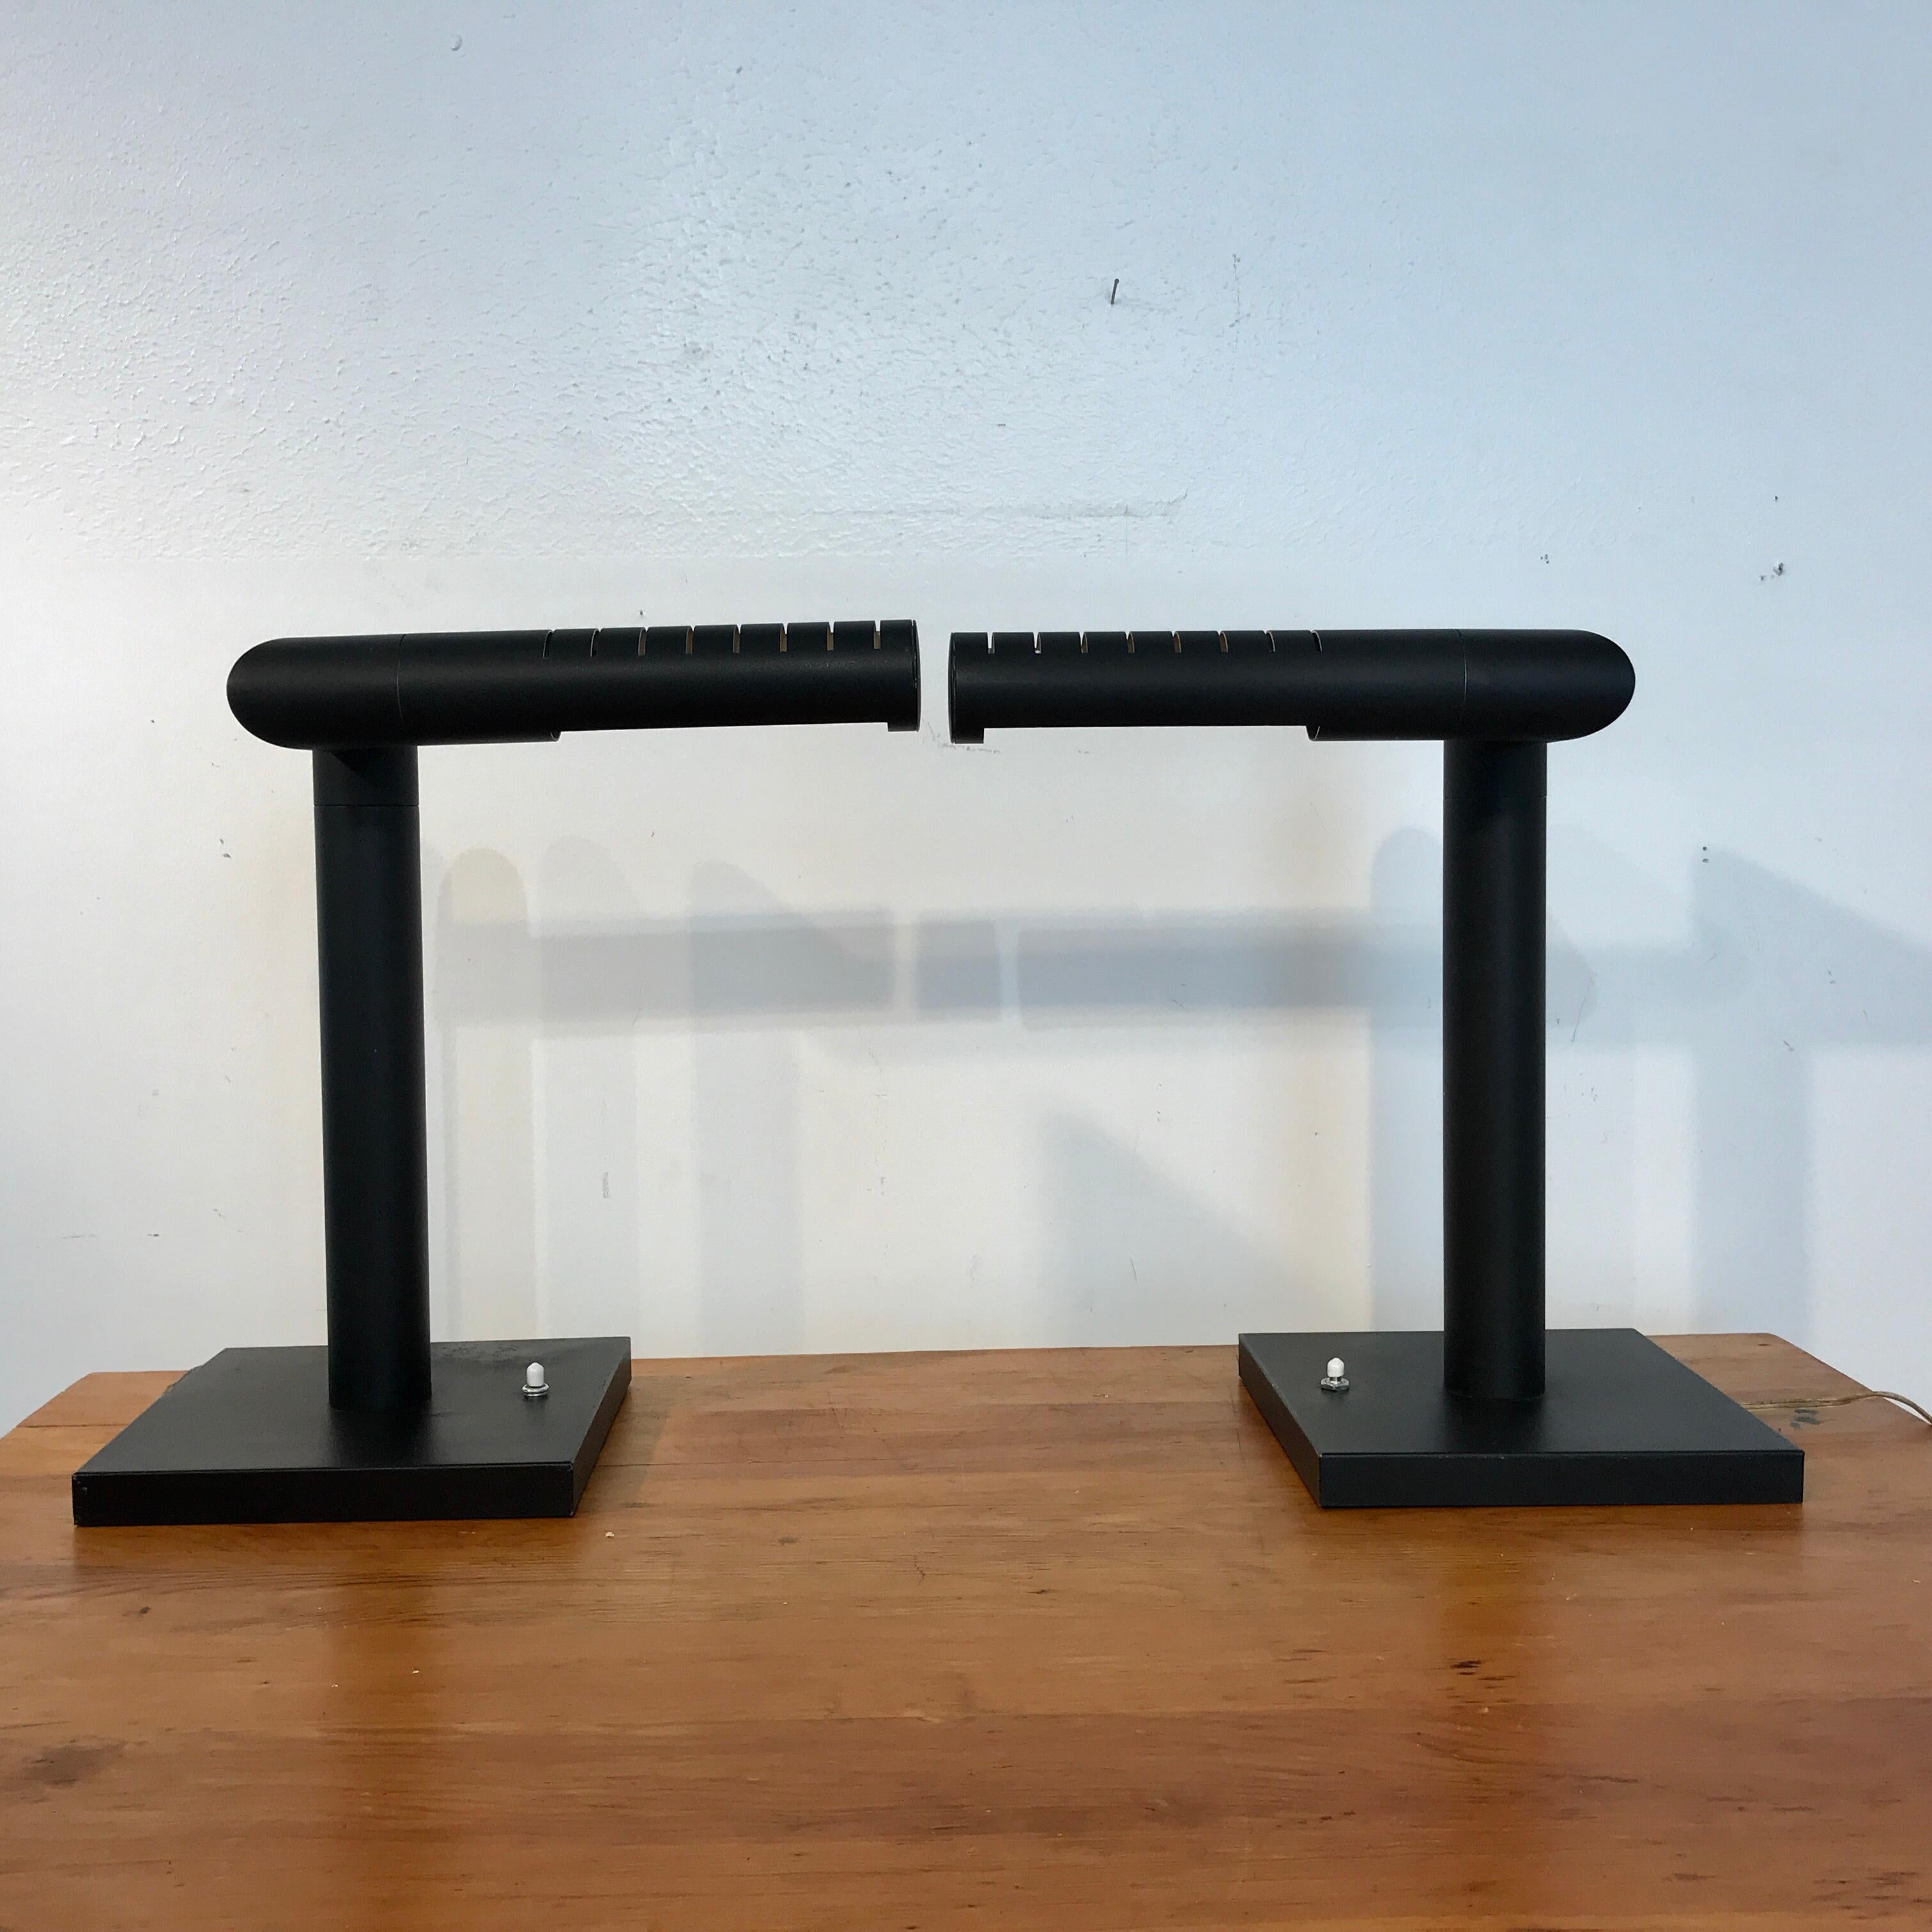 Pair of midcentury Italian Periscope desk lamps, each one blackened tubular form with numerous positional options. Each one raised on a 9